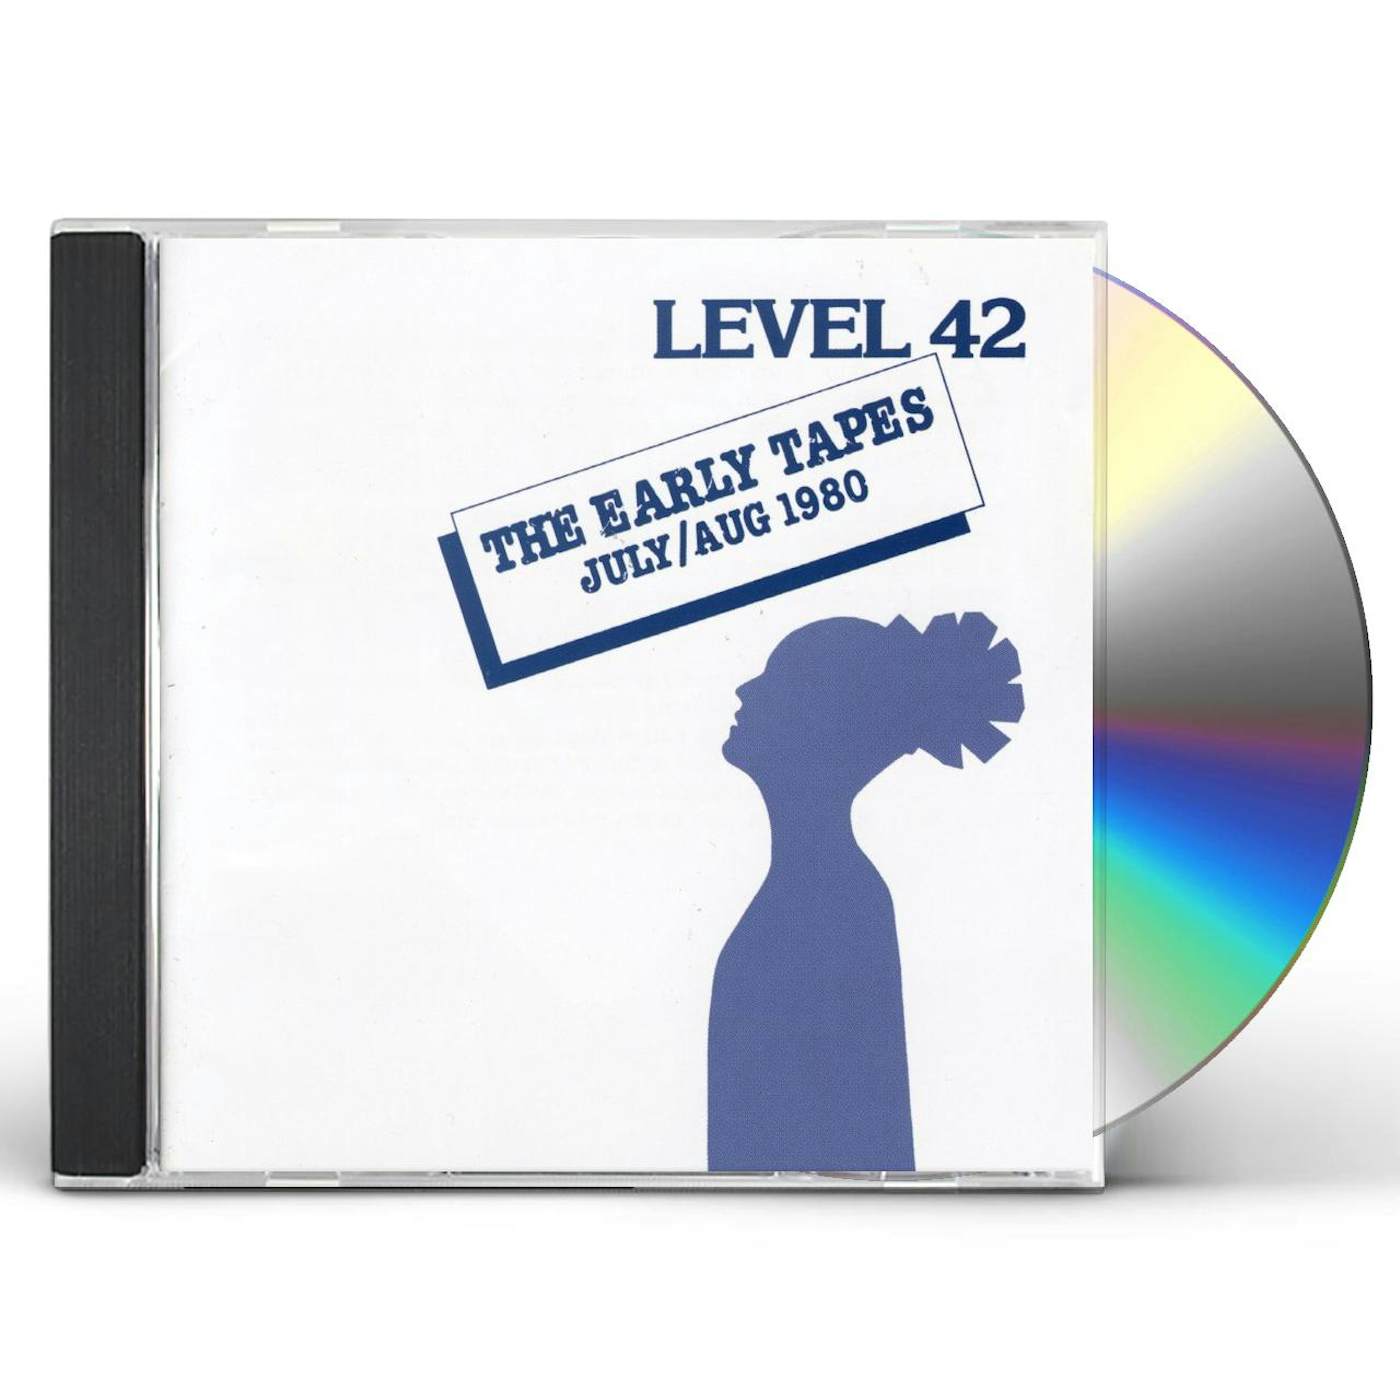 Level 42 EARLY TAPES CD